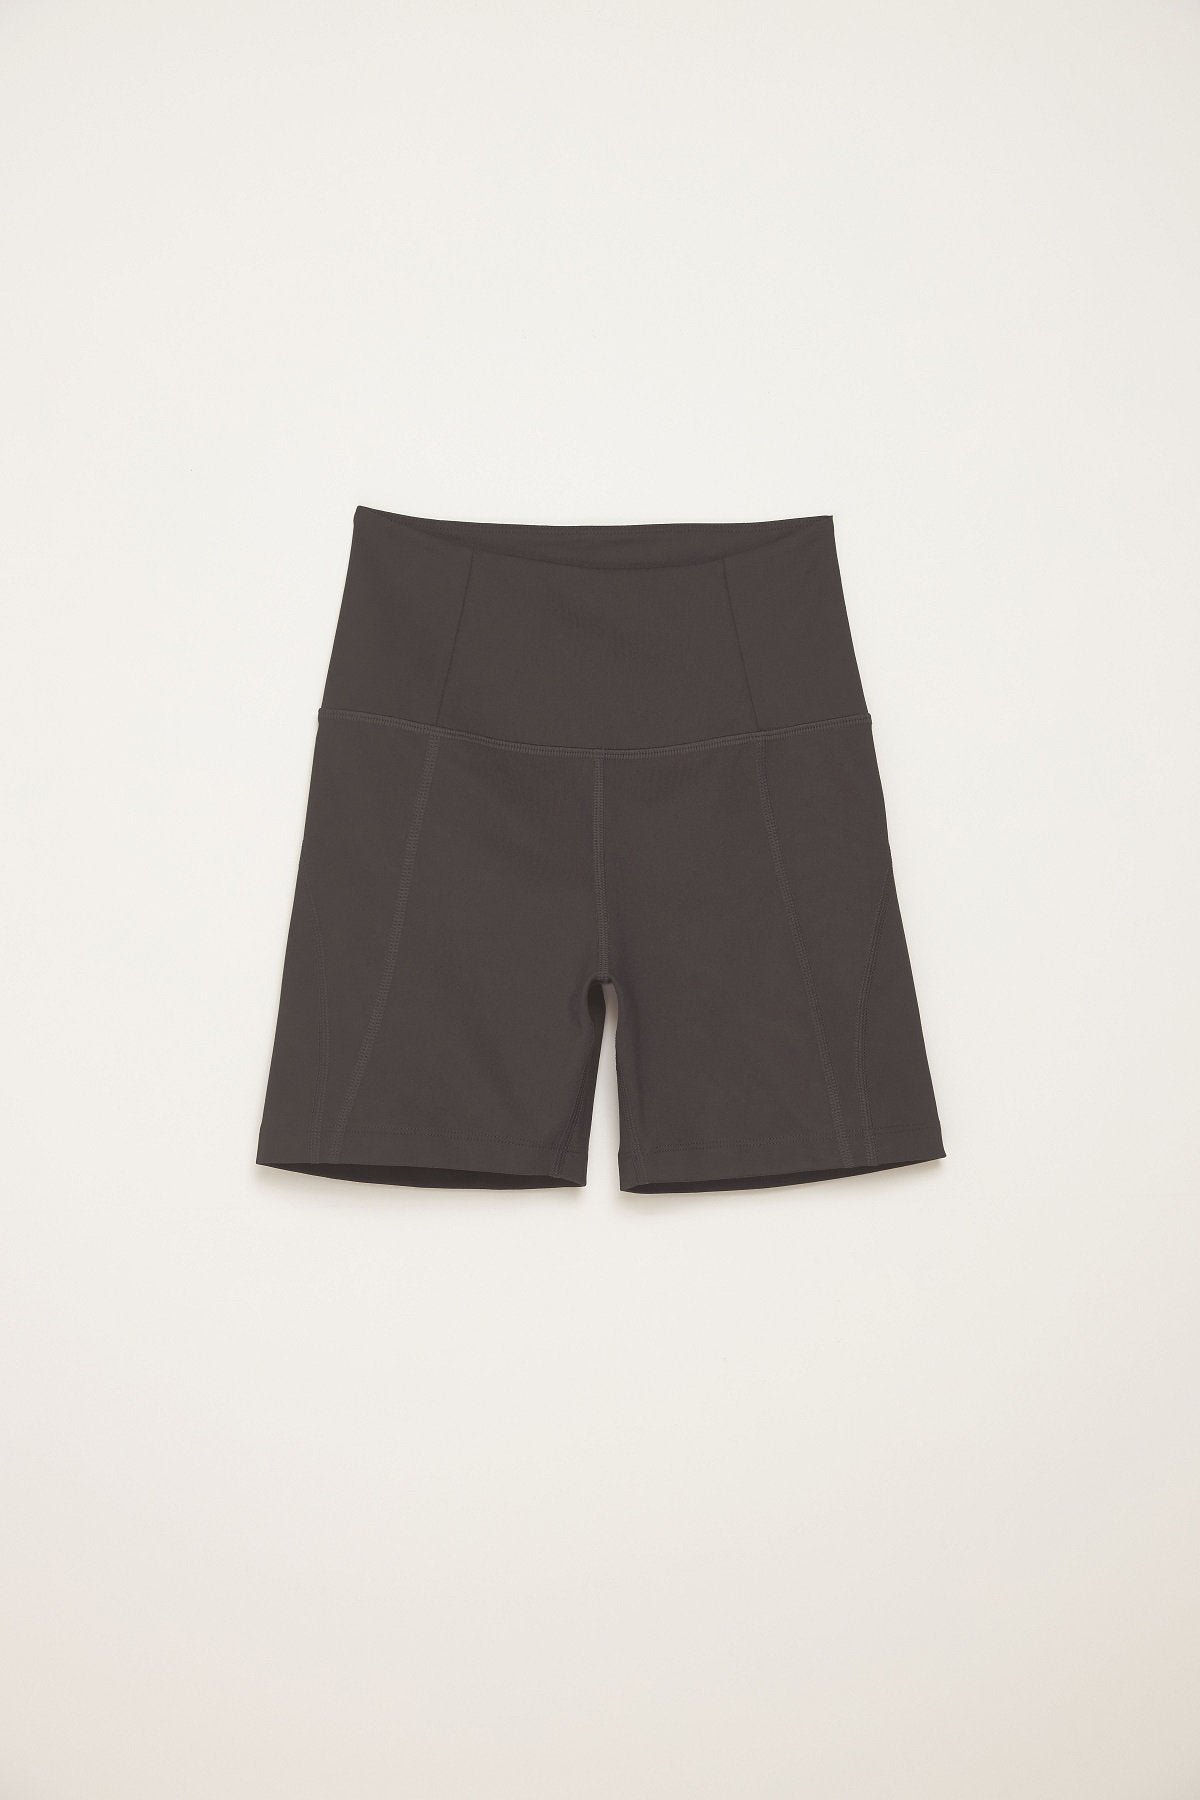 Girlfriend Collective Run Shorts High-Rise - Made from Recycled Plastic Bottles Moon Pants